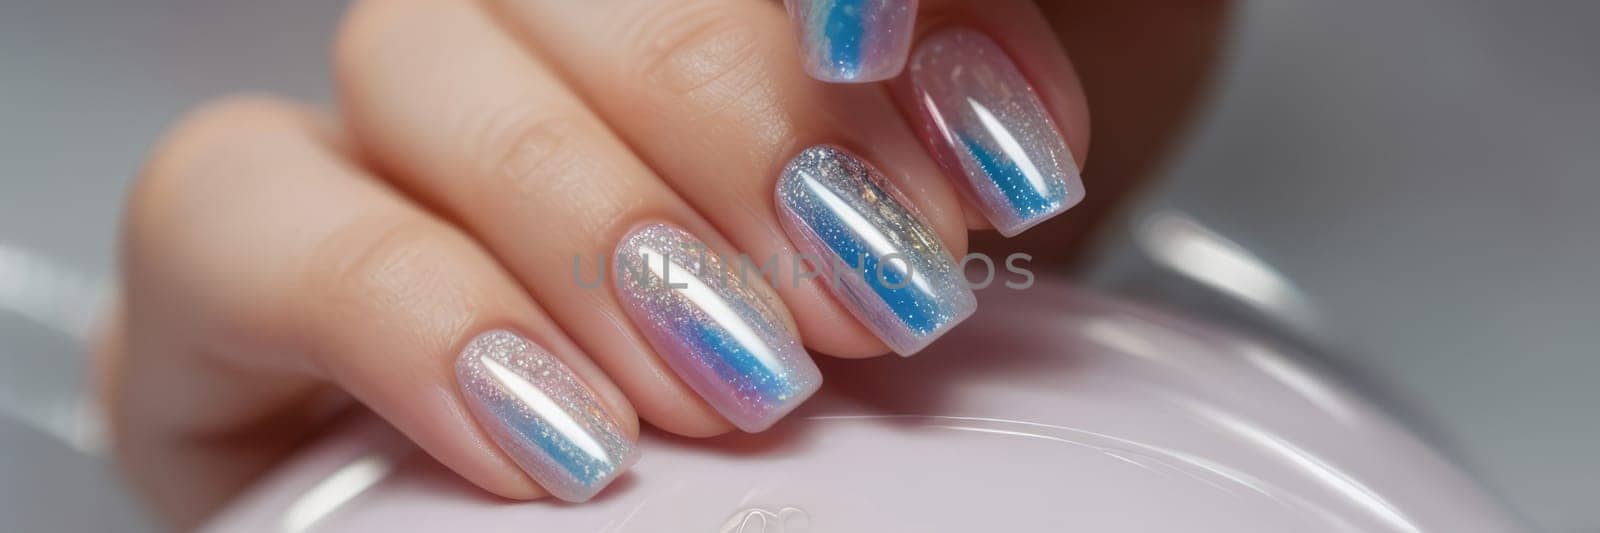 Close-up view of holographic manicure with sparkling gradient colors. by Annu1tochka